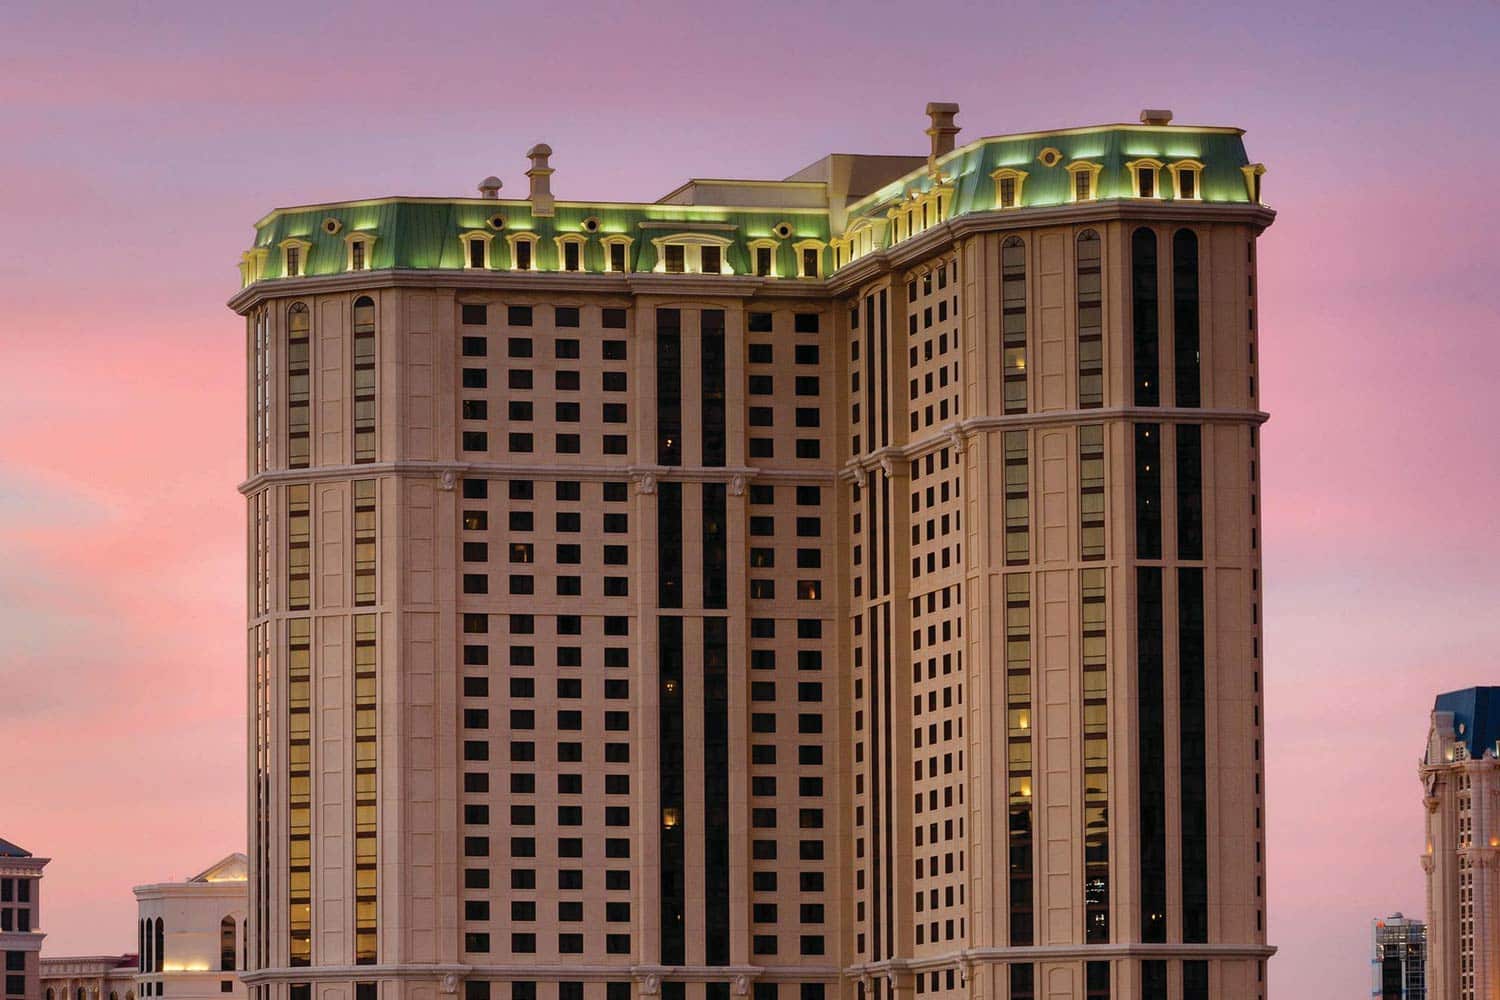 Marriott Grand Chateau 1BD – on the strip